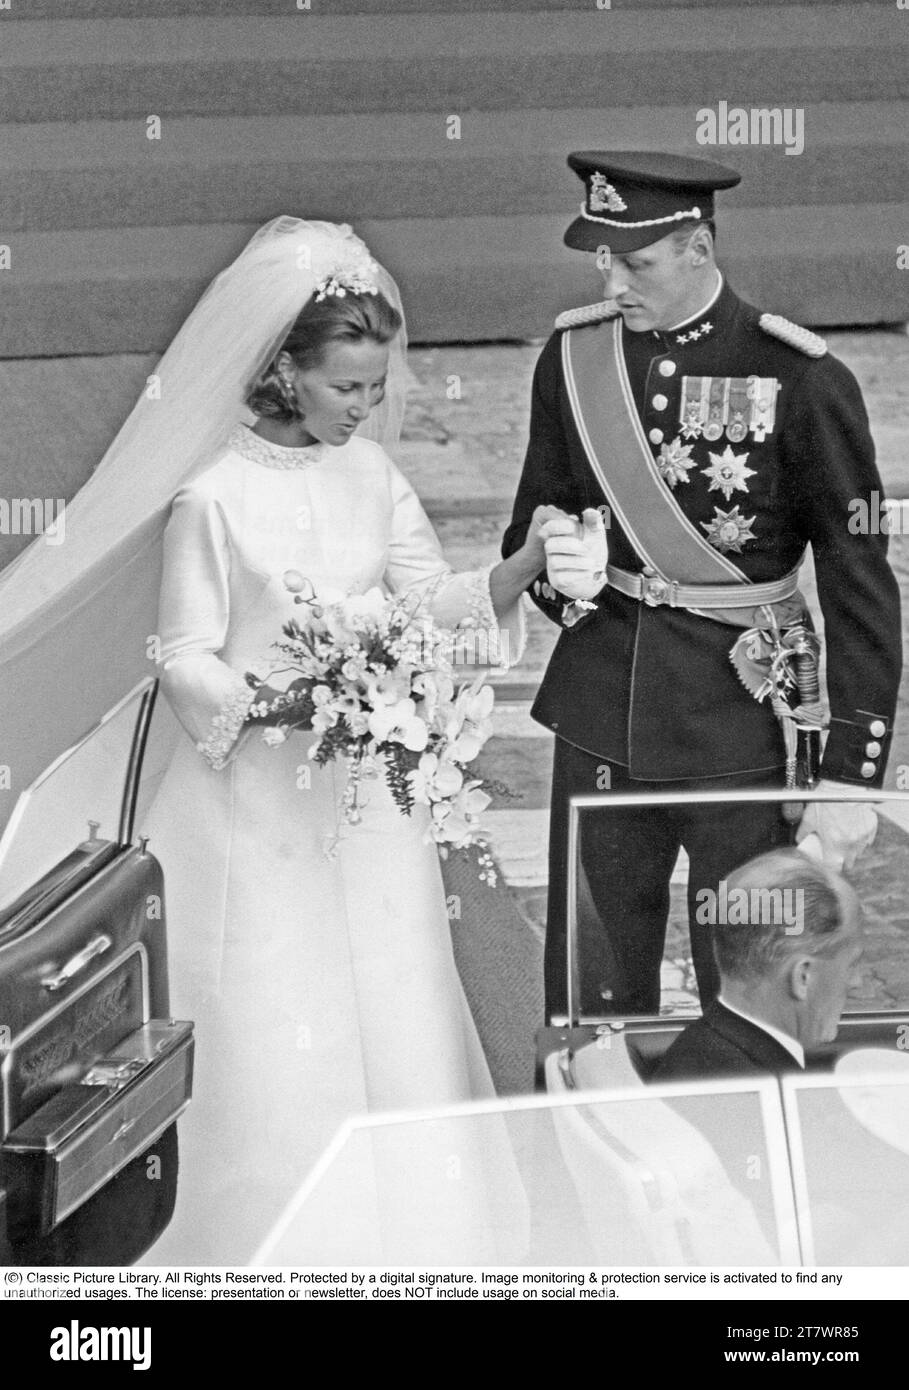 King Harald of Norway. Pictured when being crown prince with his wife Sonja at their wedding in Oslo domkyrka on august 29 1968. Stock Photo